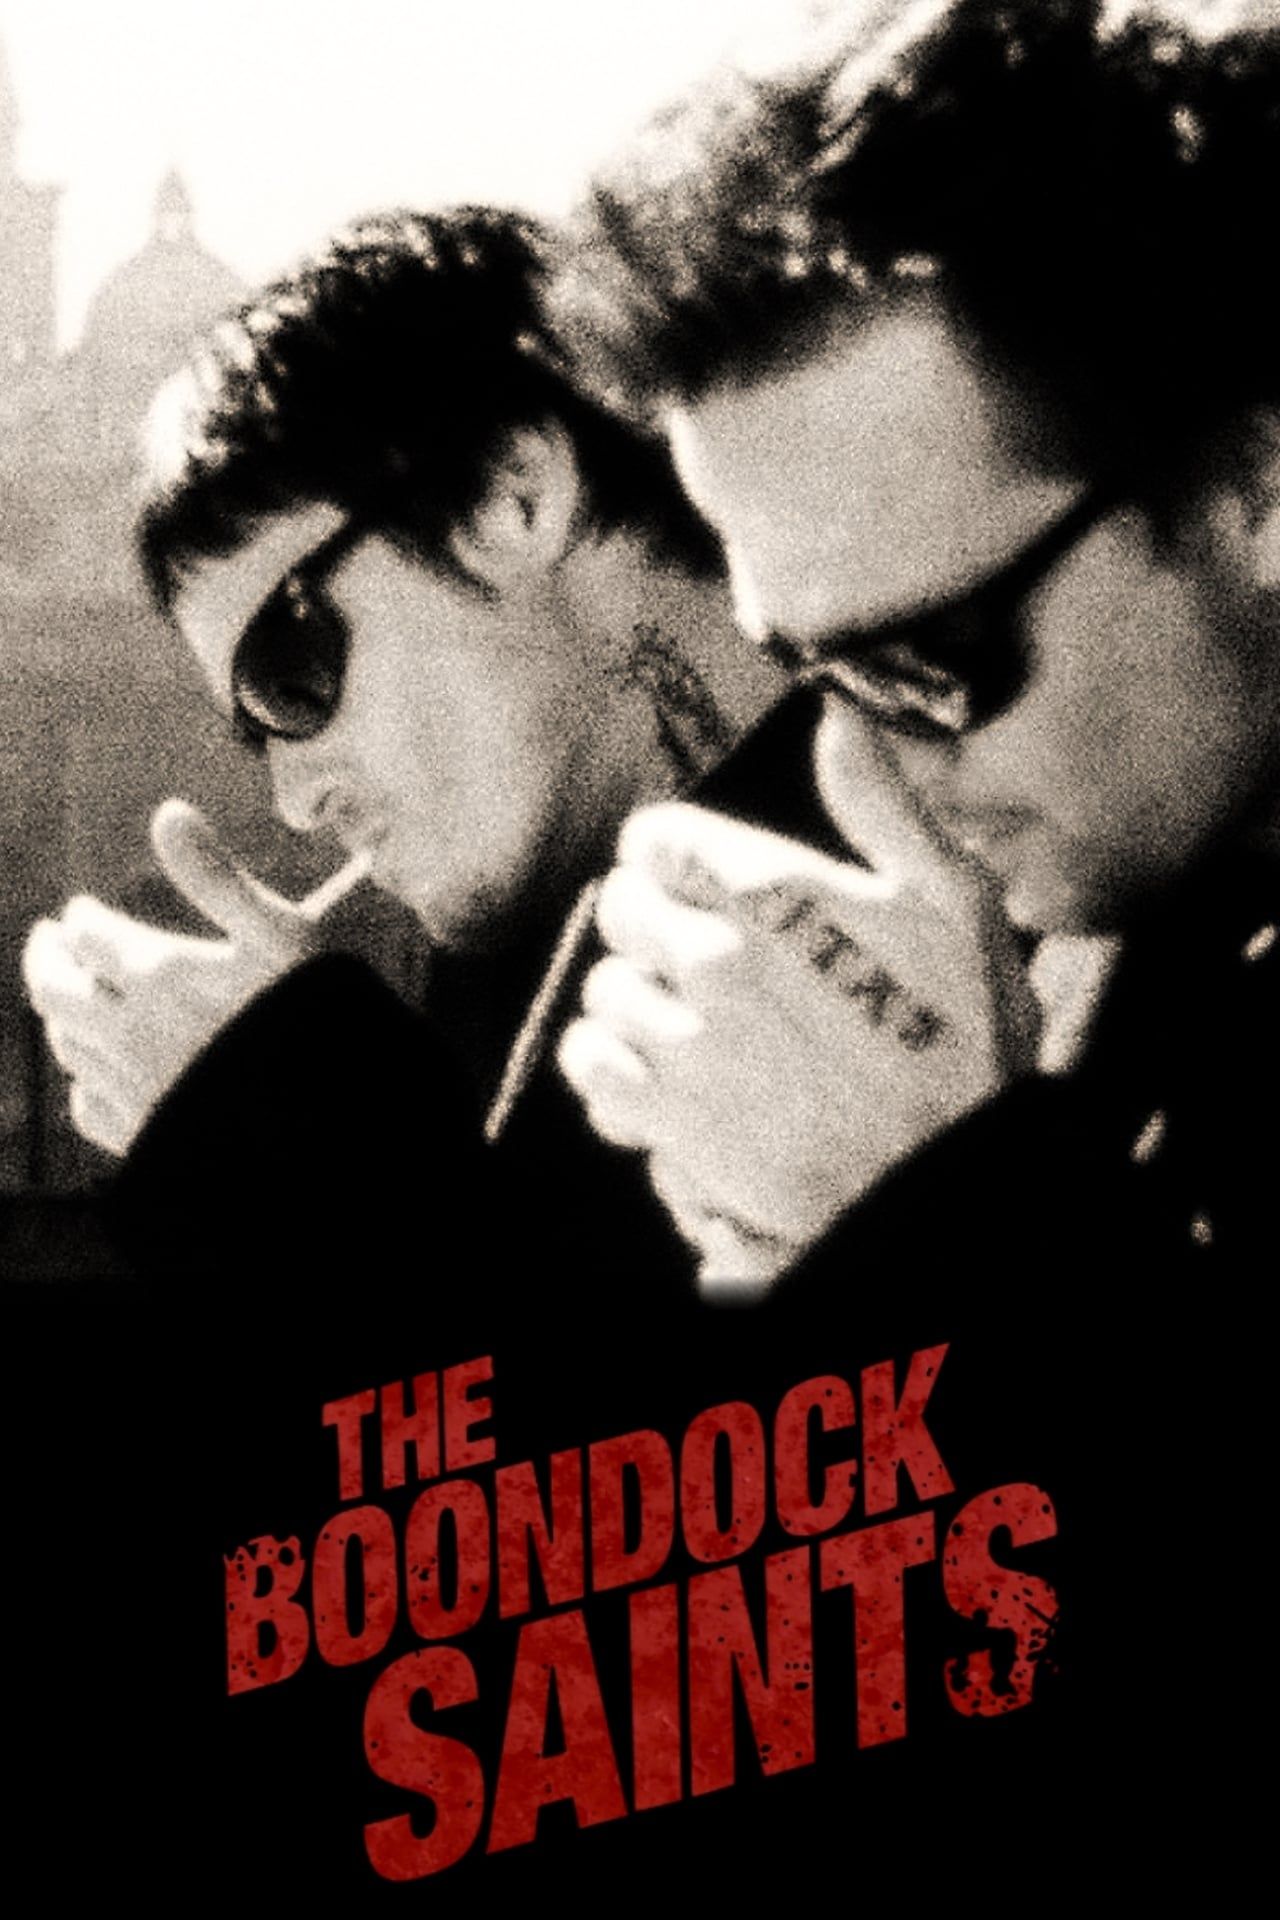 The Boondock Saints Movie Poster Showing Norman Reedus and Sean Patrick Flanery Smoking Cigarettes with Sunglasses